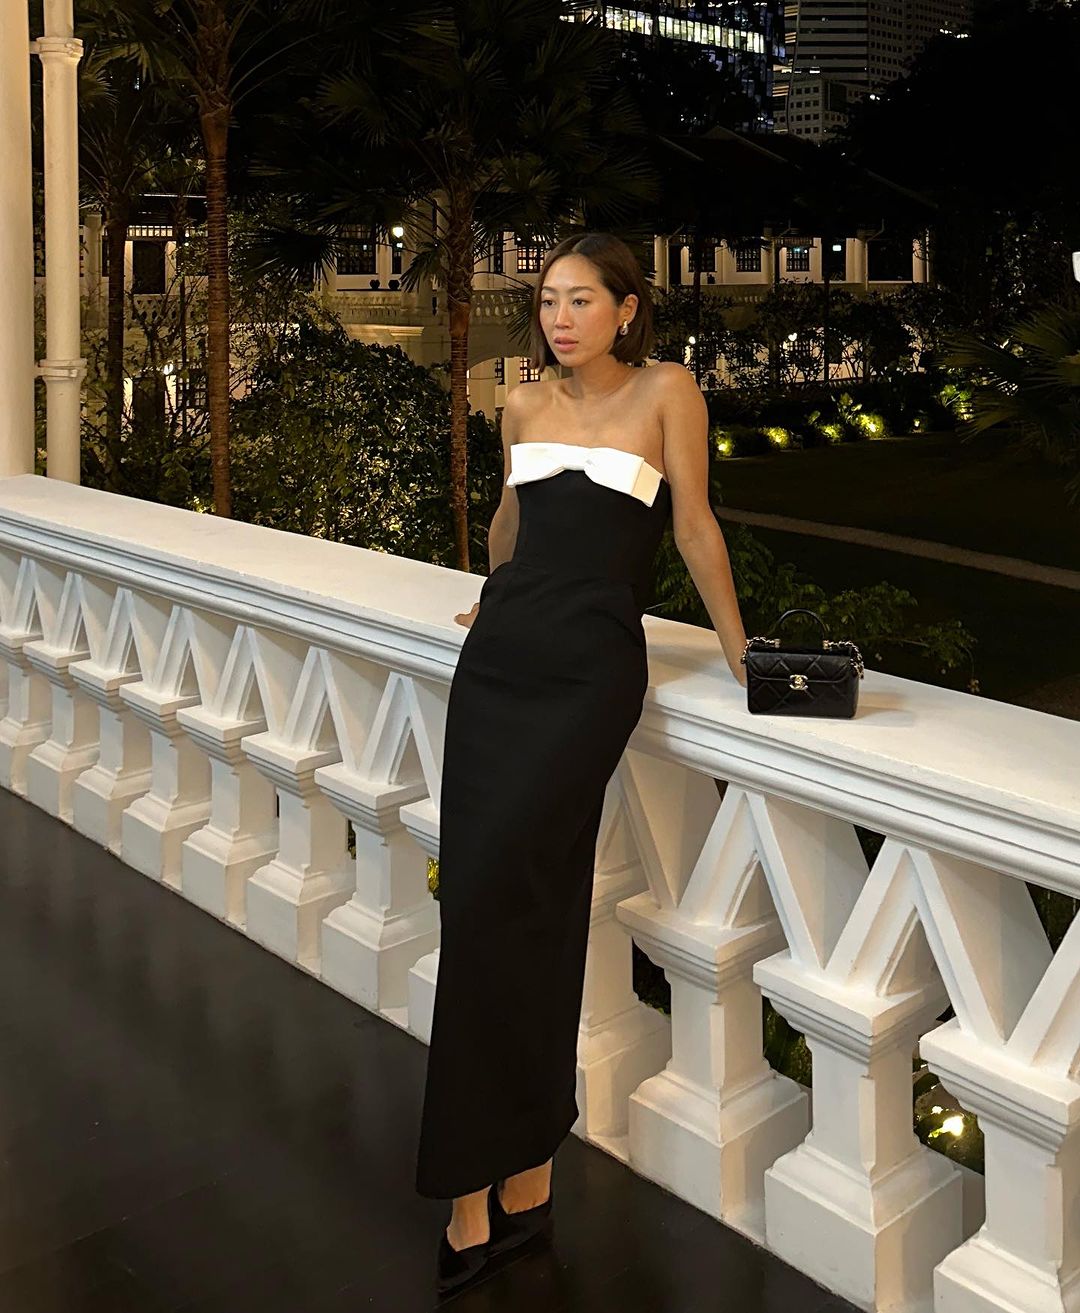 @aimeesong wearing a black and white gown